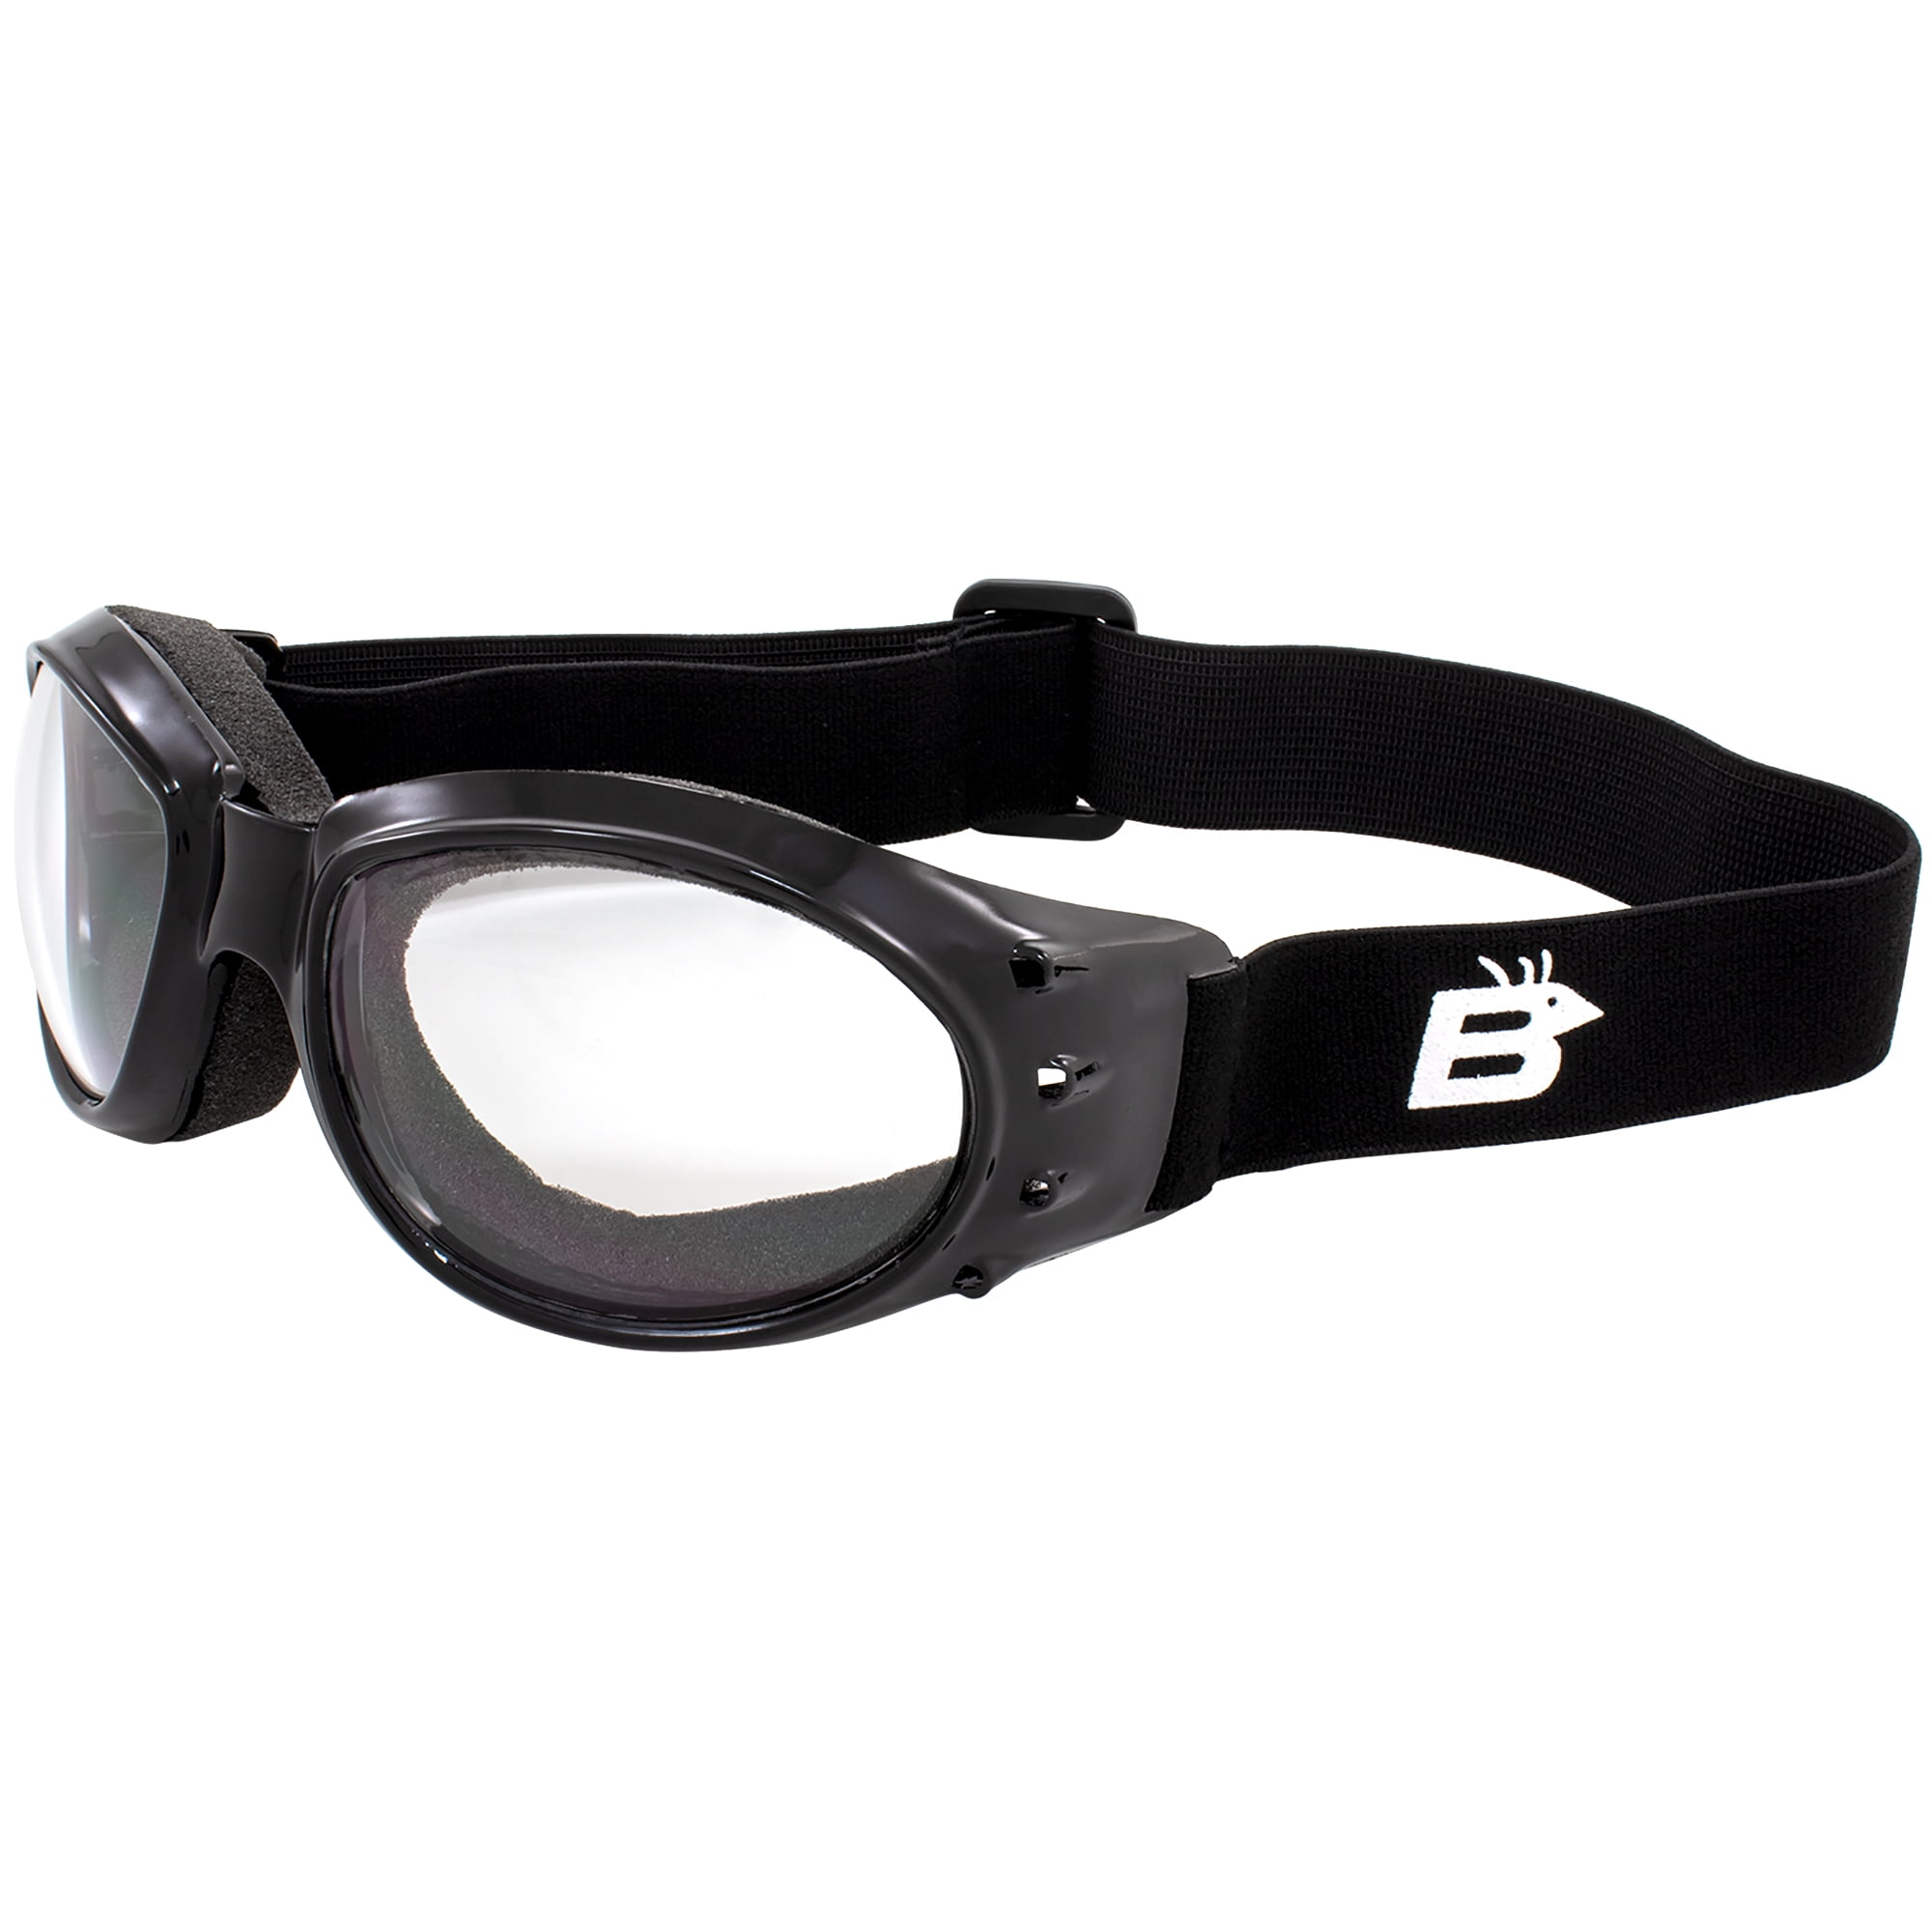 Red Baron Motorcycle Aviator 2 Goggles For Day and Night Use Super Dark Lens and Clear Mirror Lens 